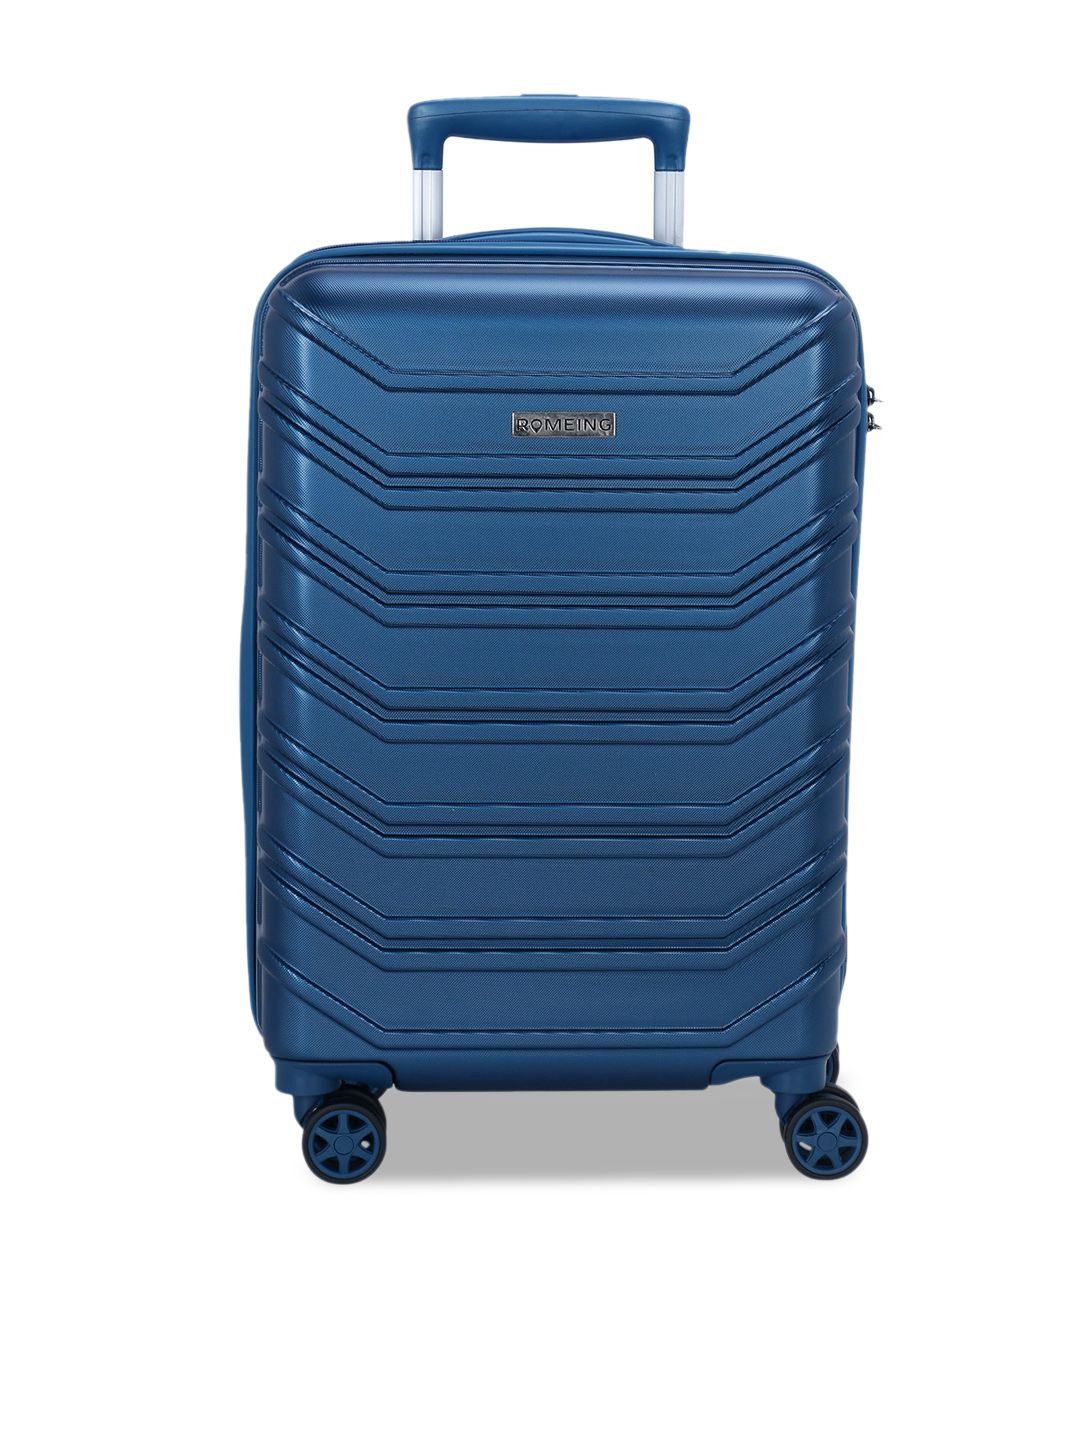 ROMEING Monopoli Navy Blue Textured Hard-Sided Polycarbonate Cabin Trolley Suitcase Price in India